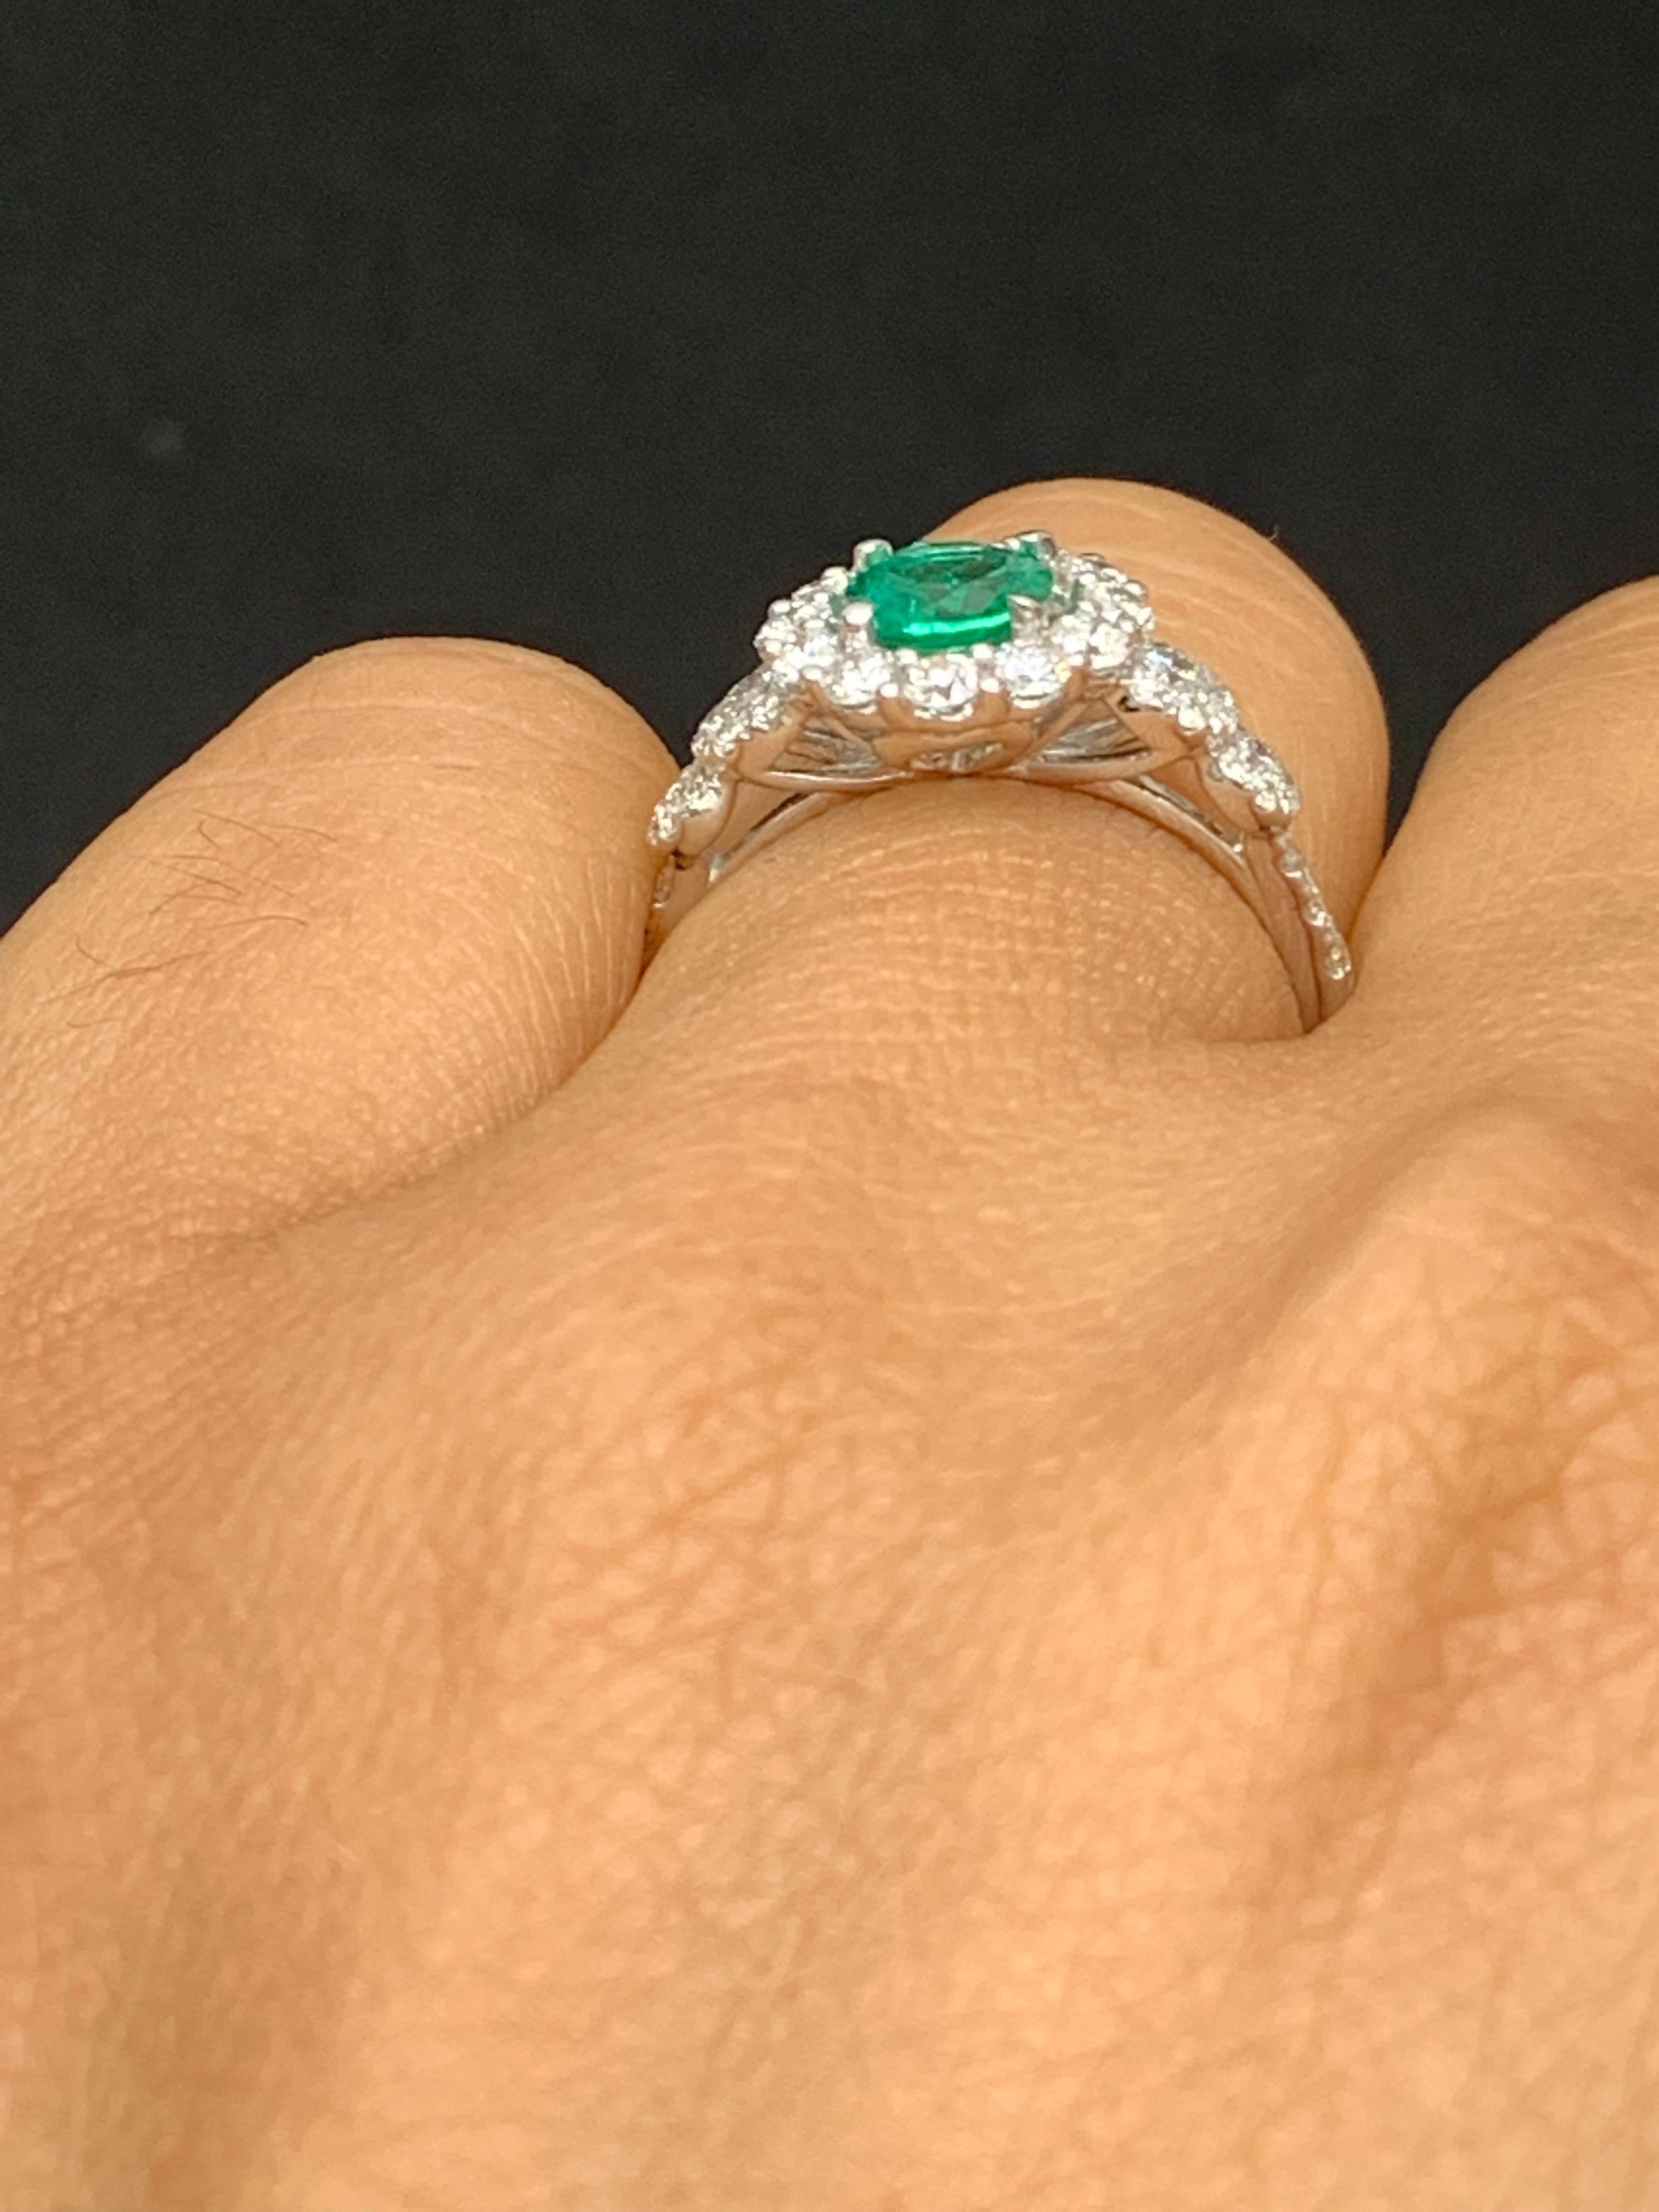 0.62 Carat Round Cut Emerald and Diamond Fashion Ring in 18k White Gold For Sale 3